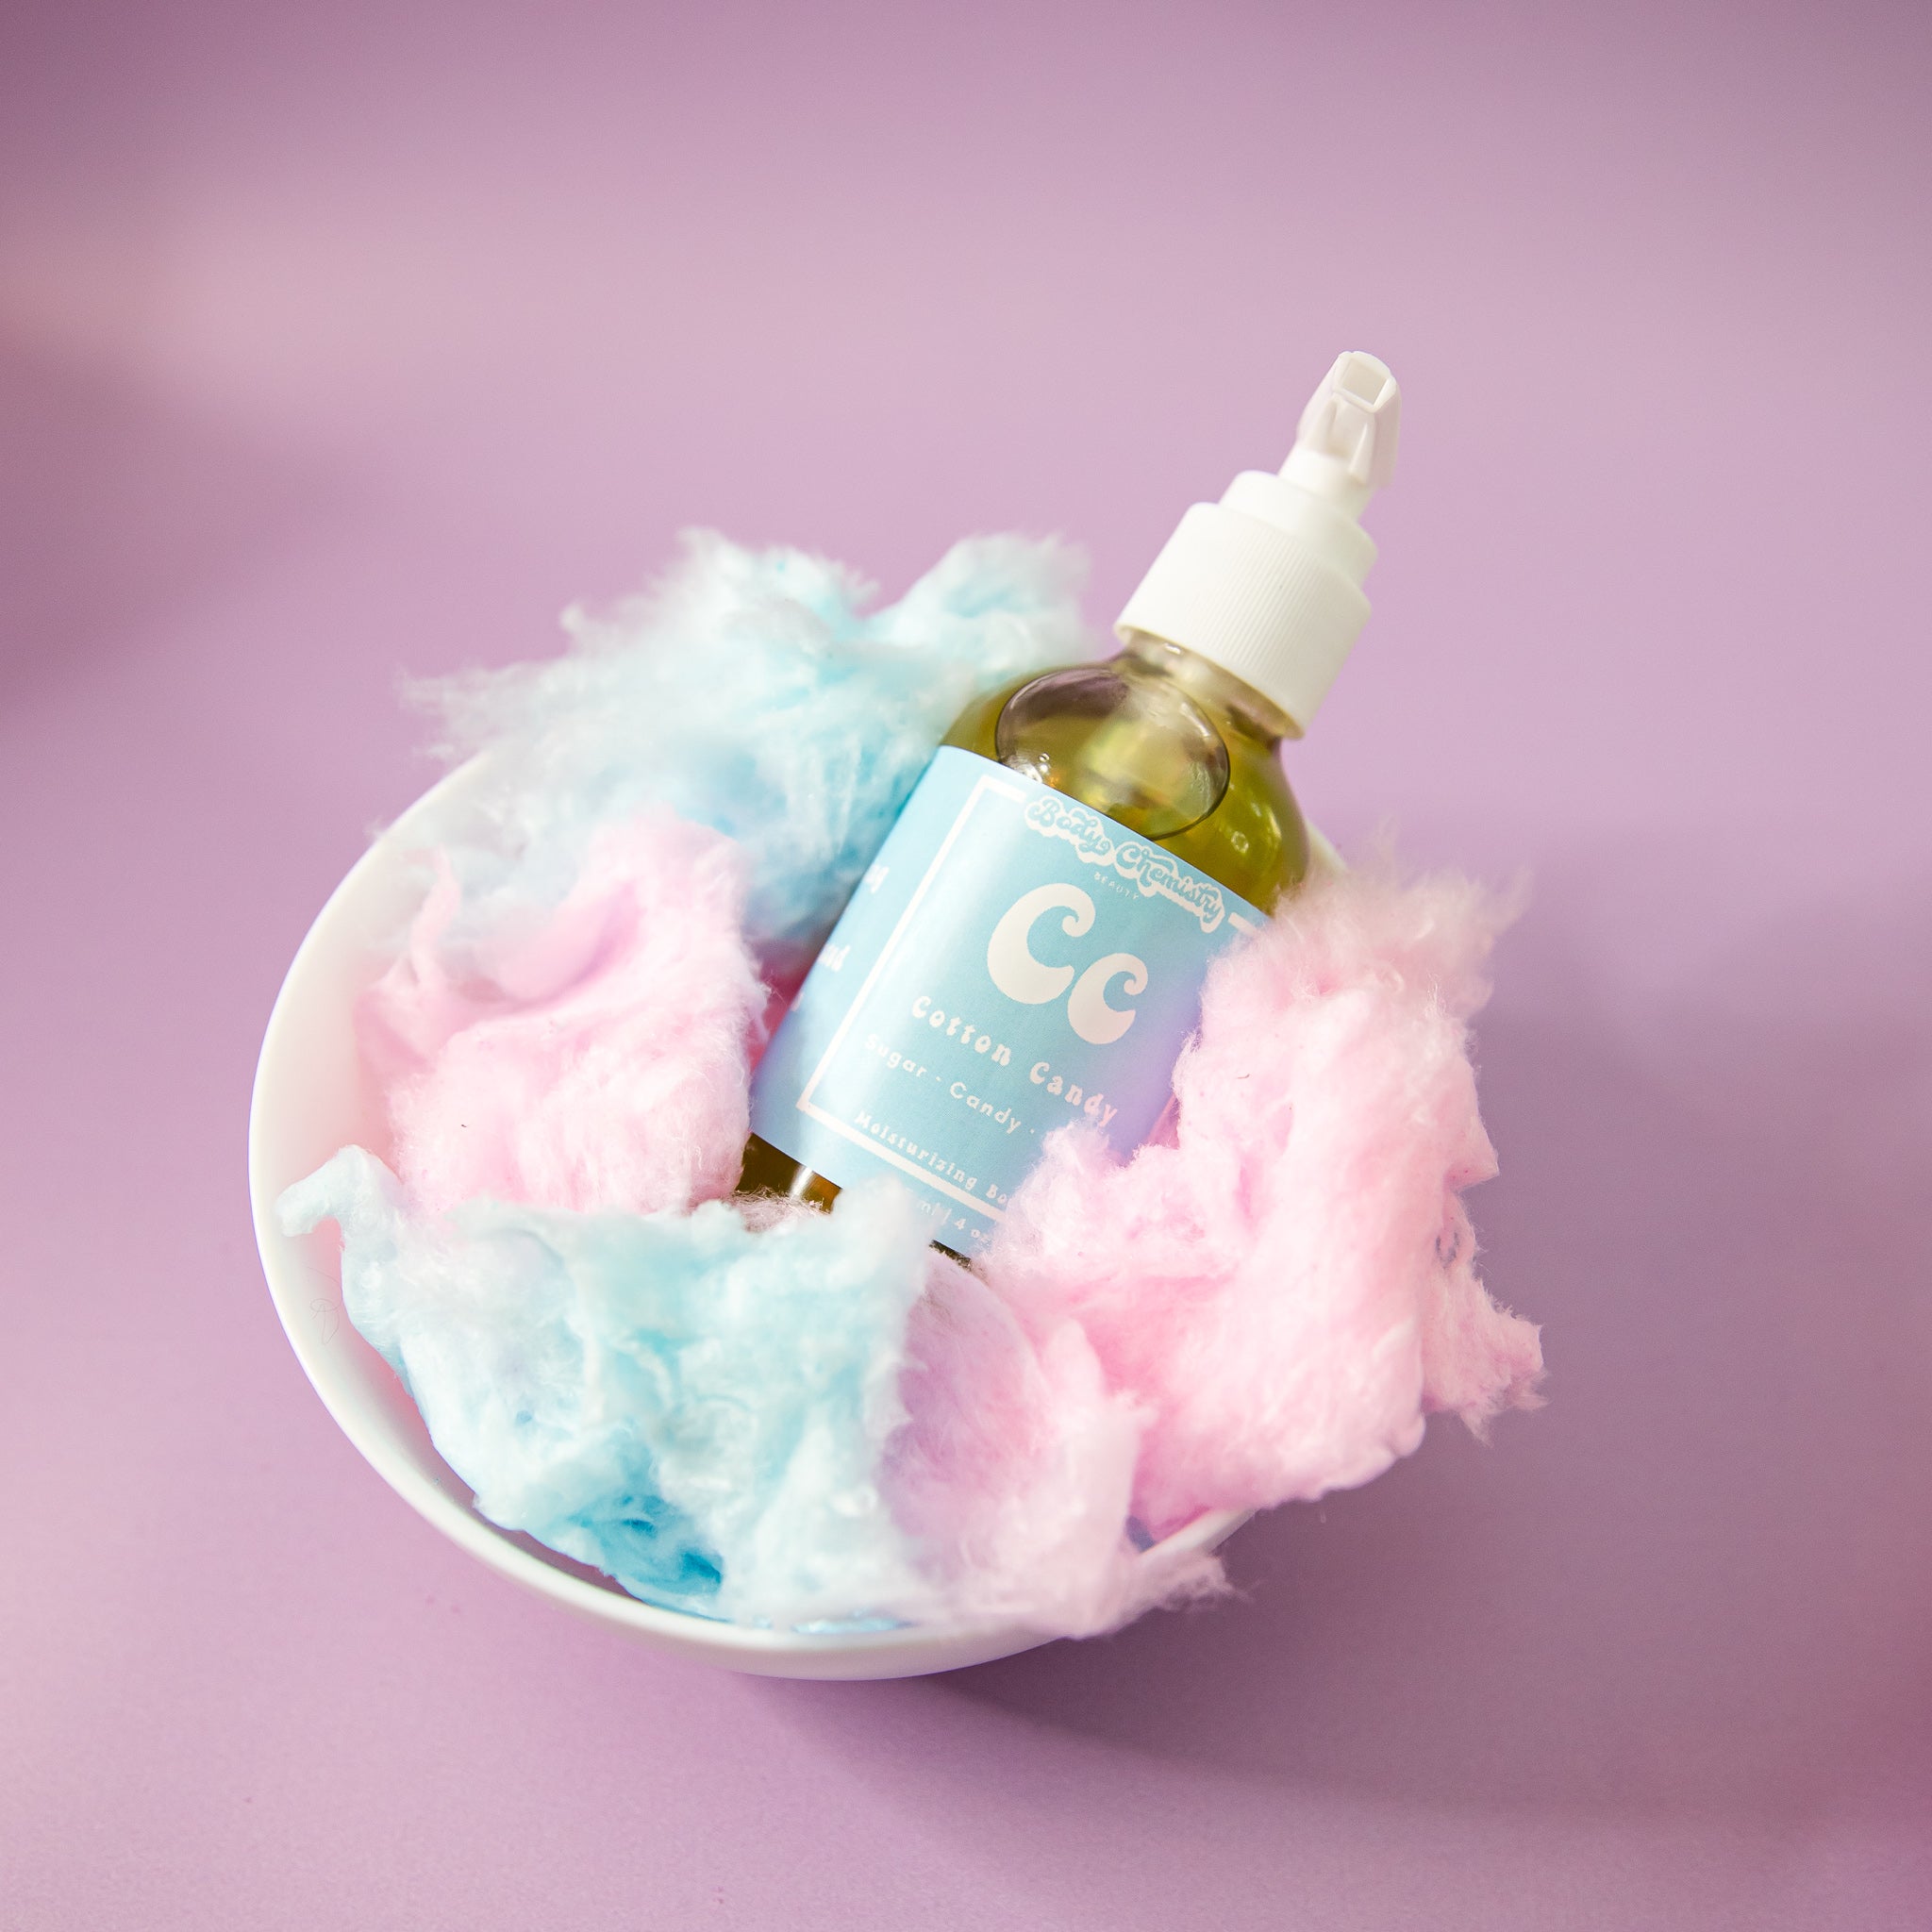 Cotton Candy Fragrance Oil - Natural Sister's / Nature's Lab Store